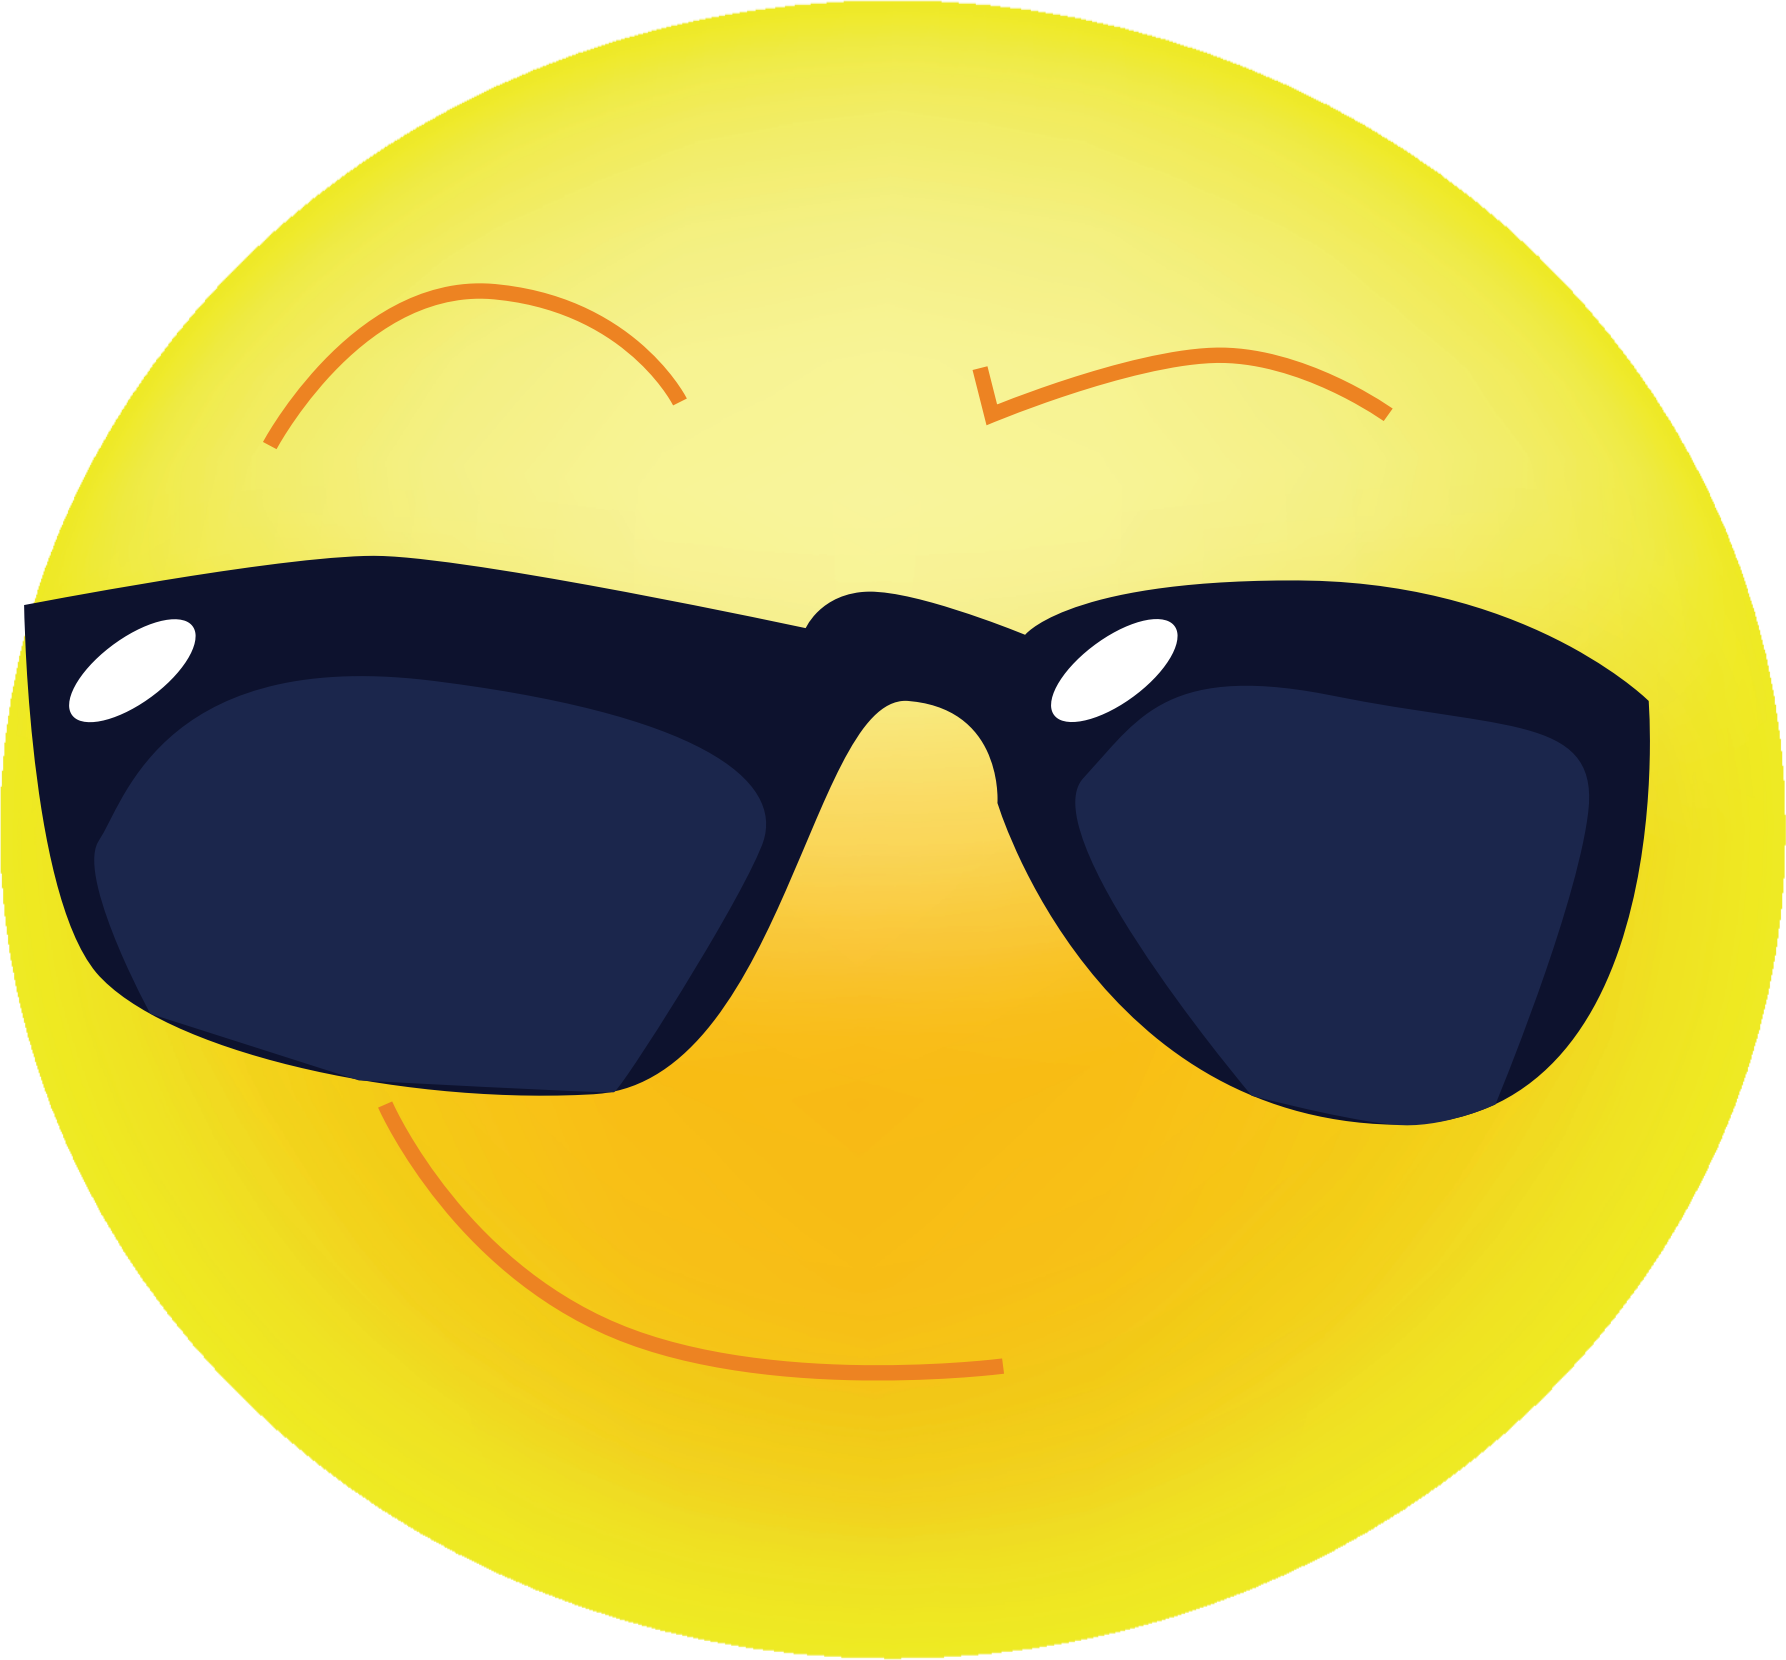 glasses clipart yellow